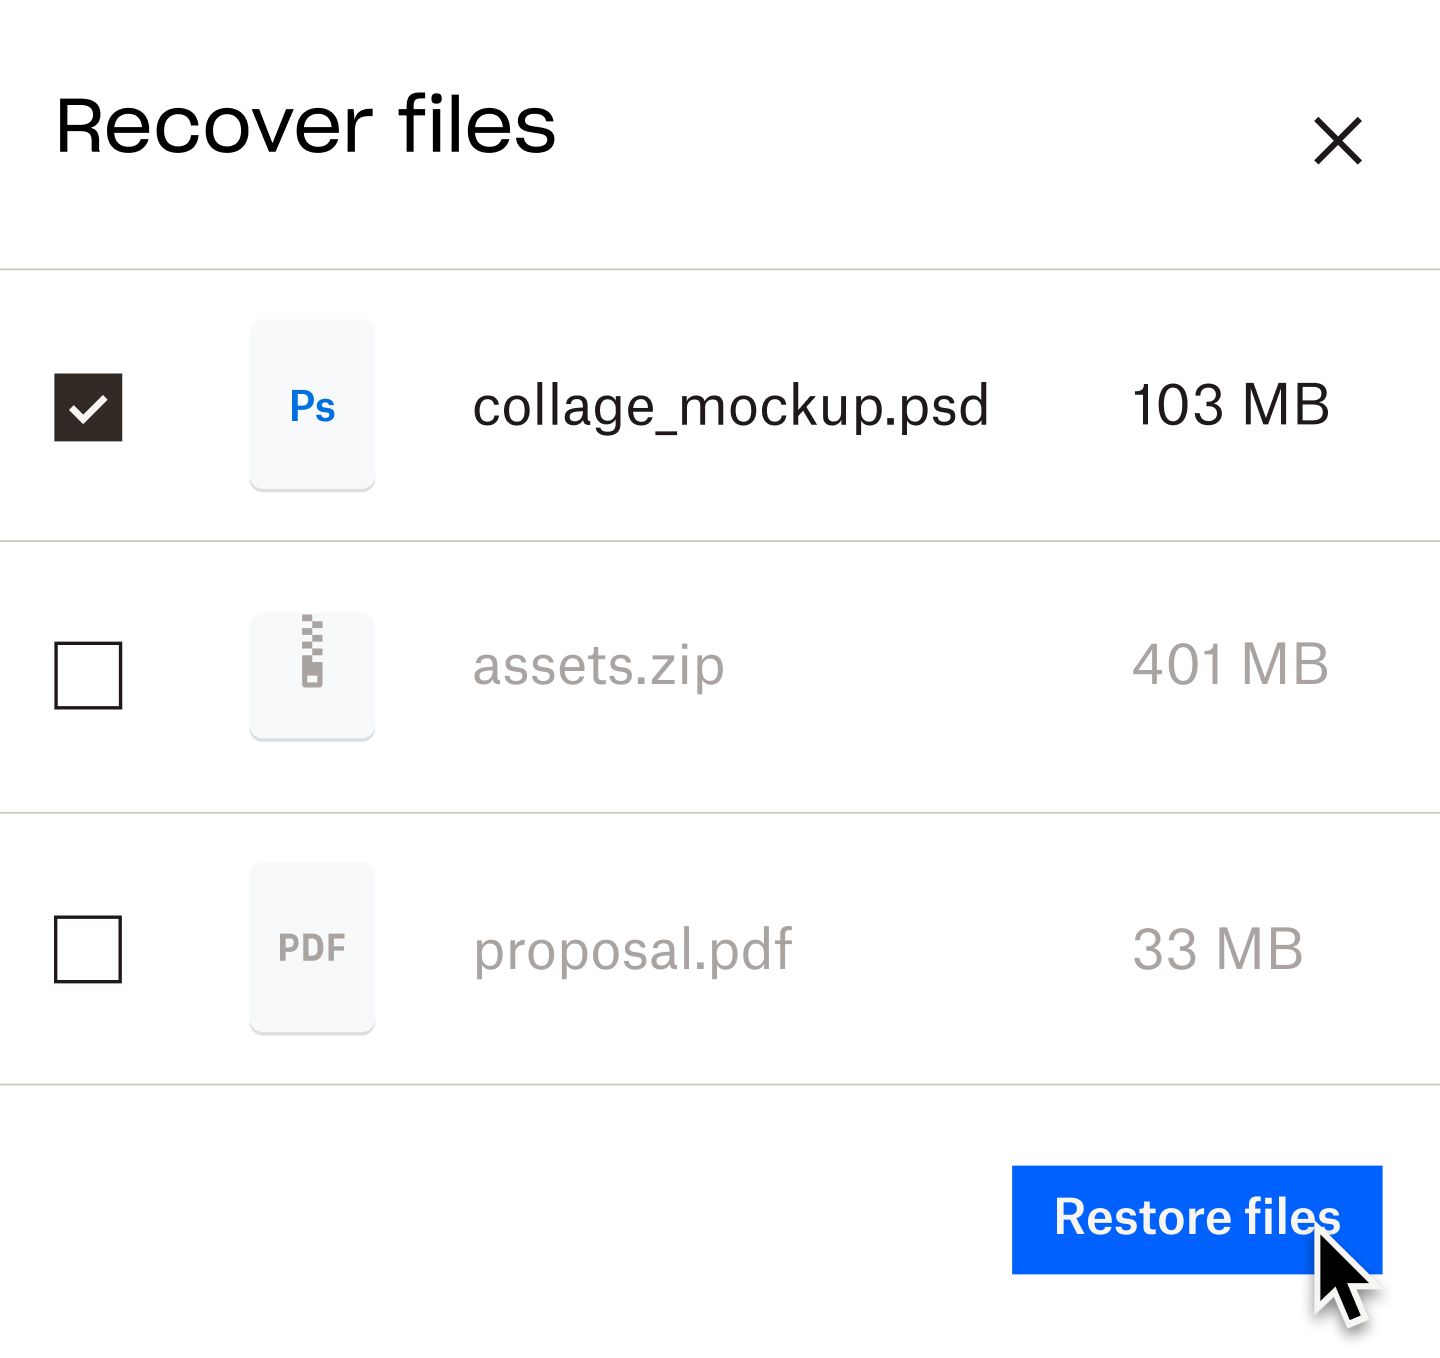 Recover files screen in Dropbox